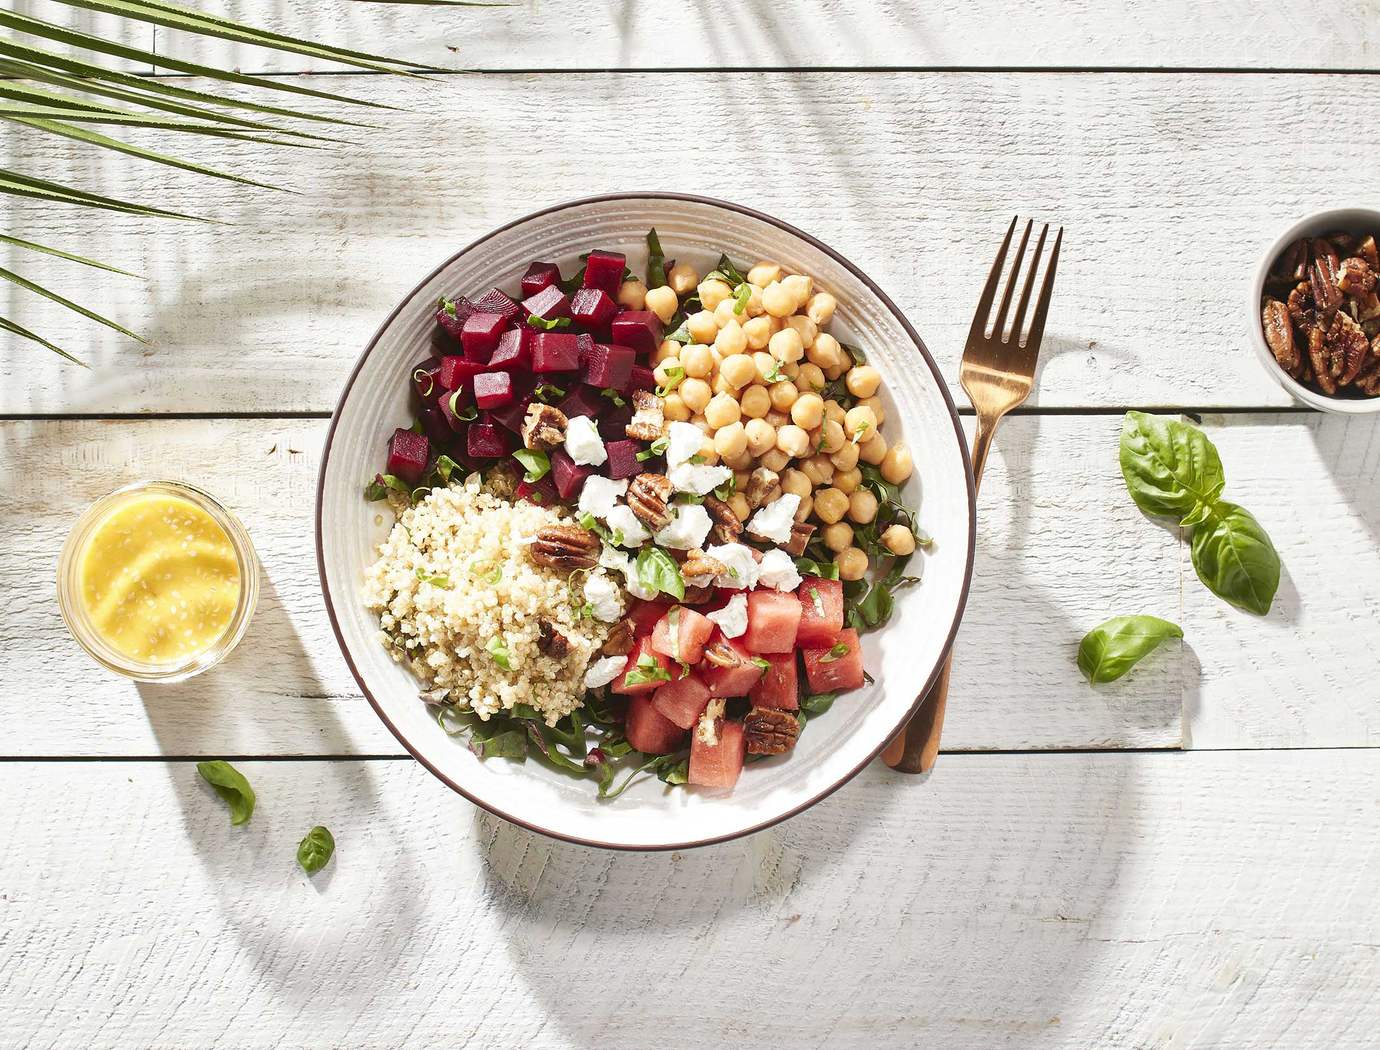 Chickpeas and beets veggie bowl with watermelon